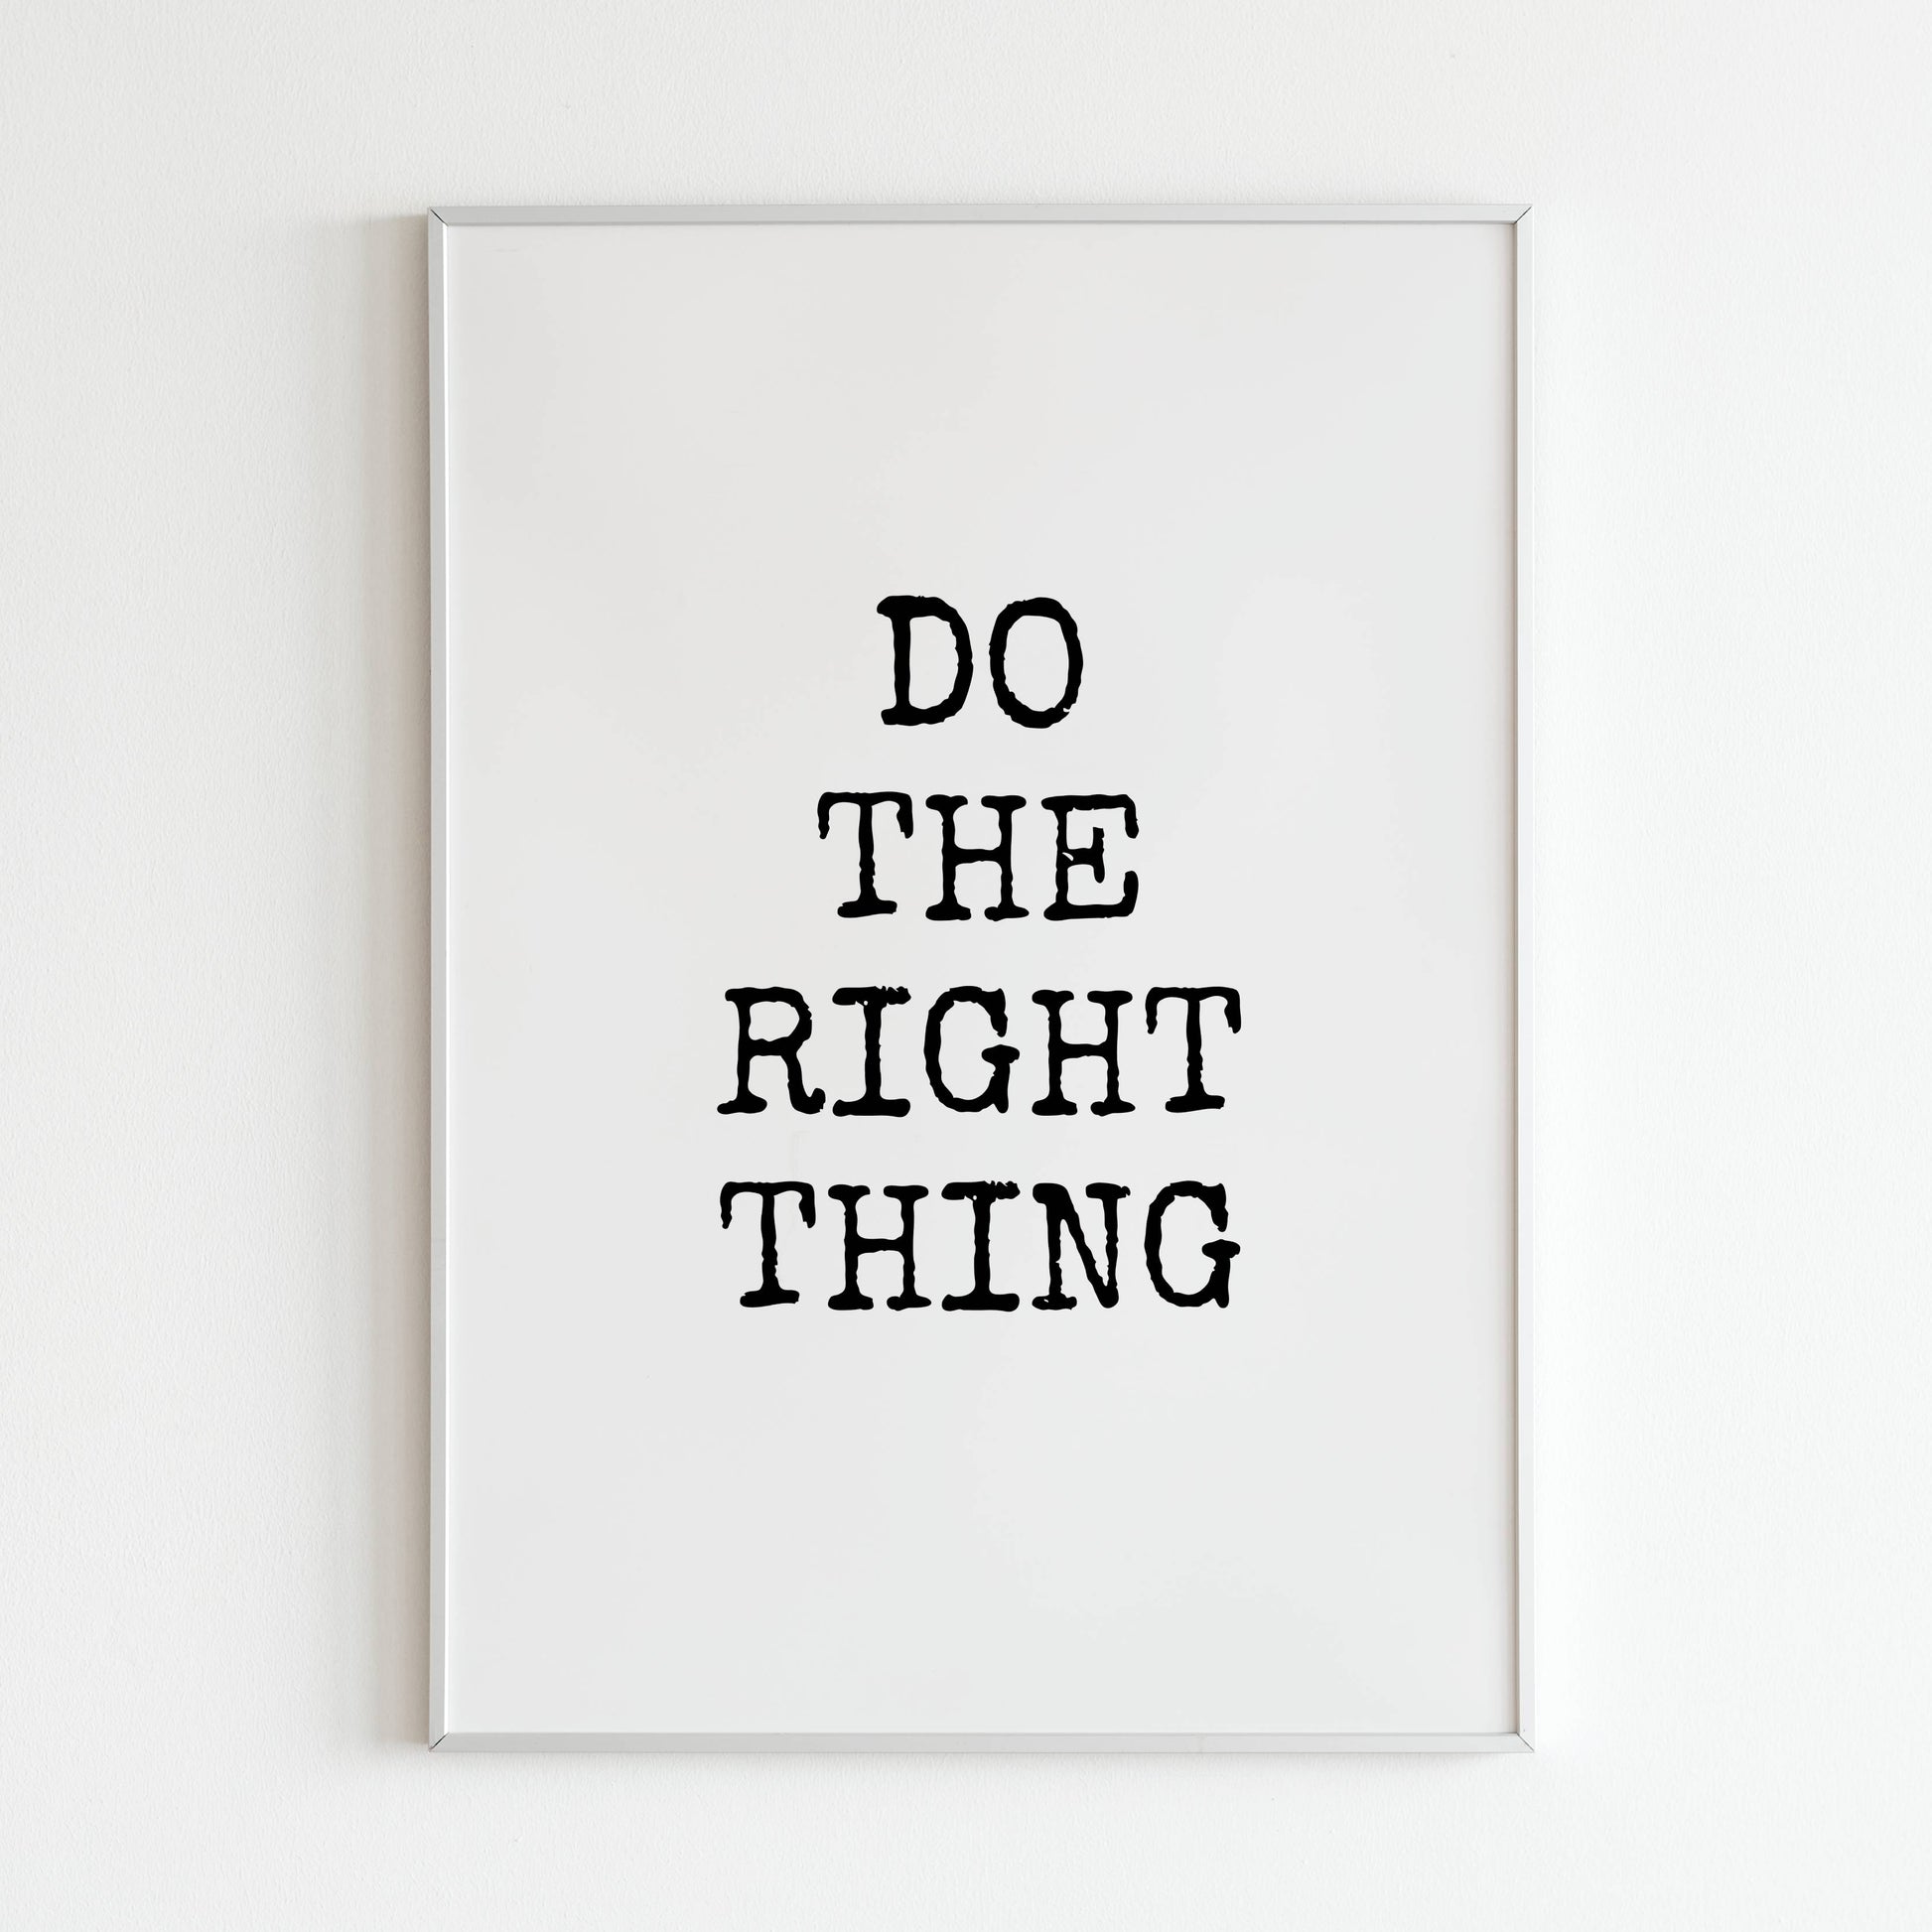 Downloadable "Do the right thing" wall art for a reminder of good choices.